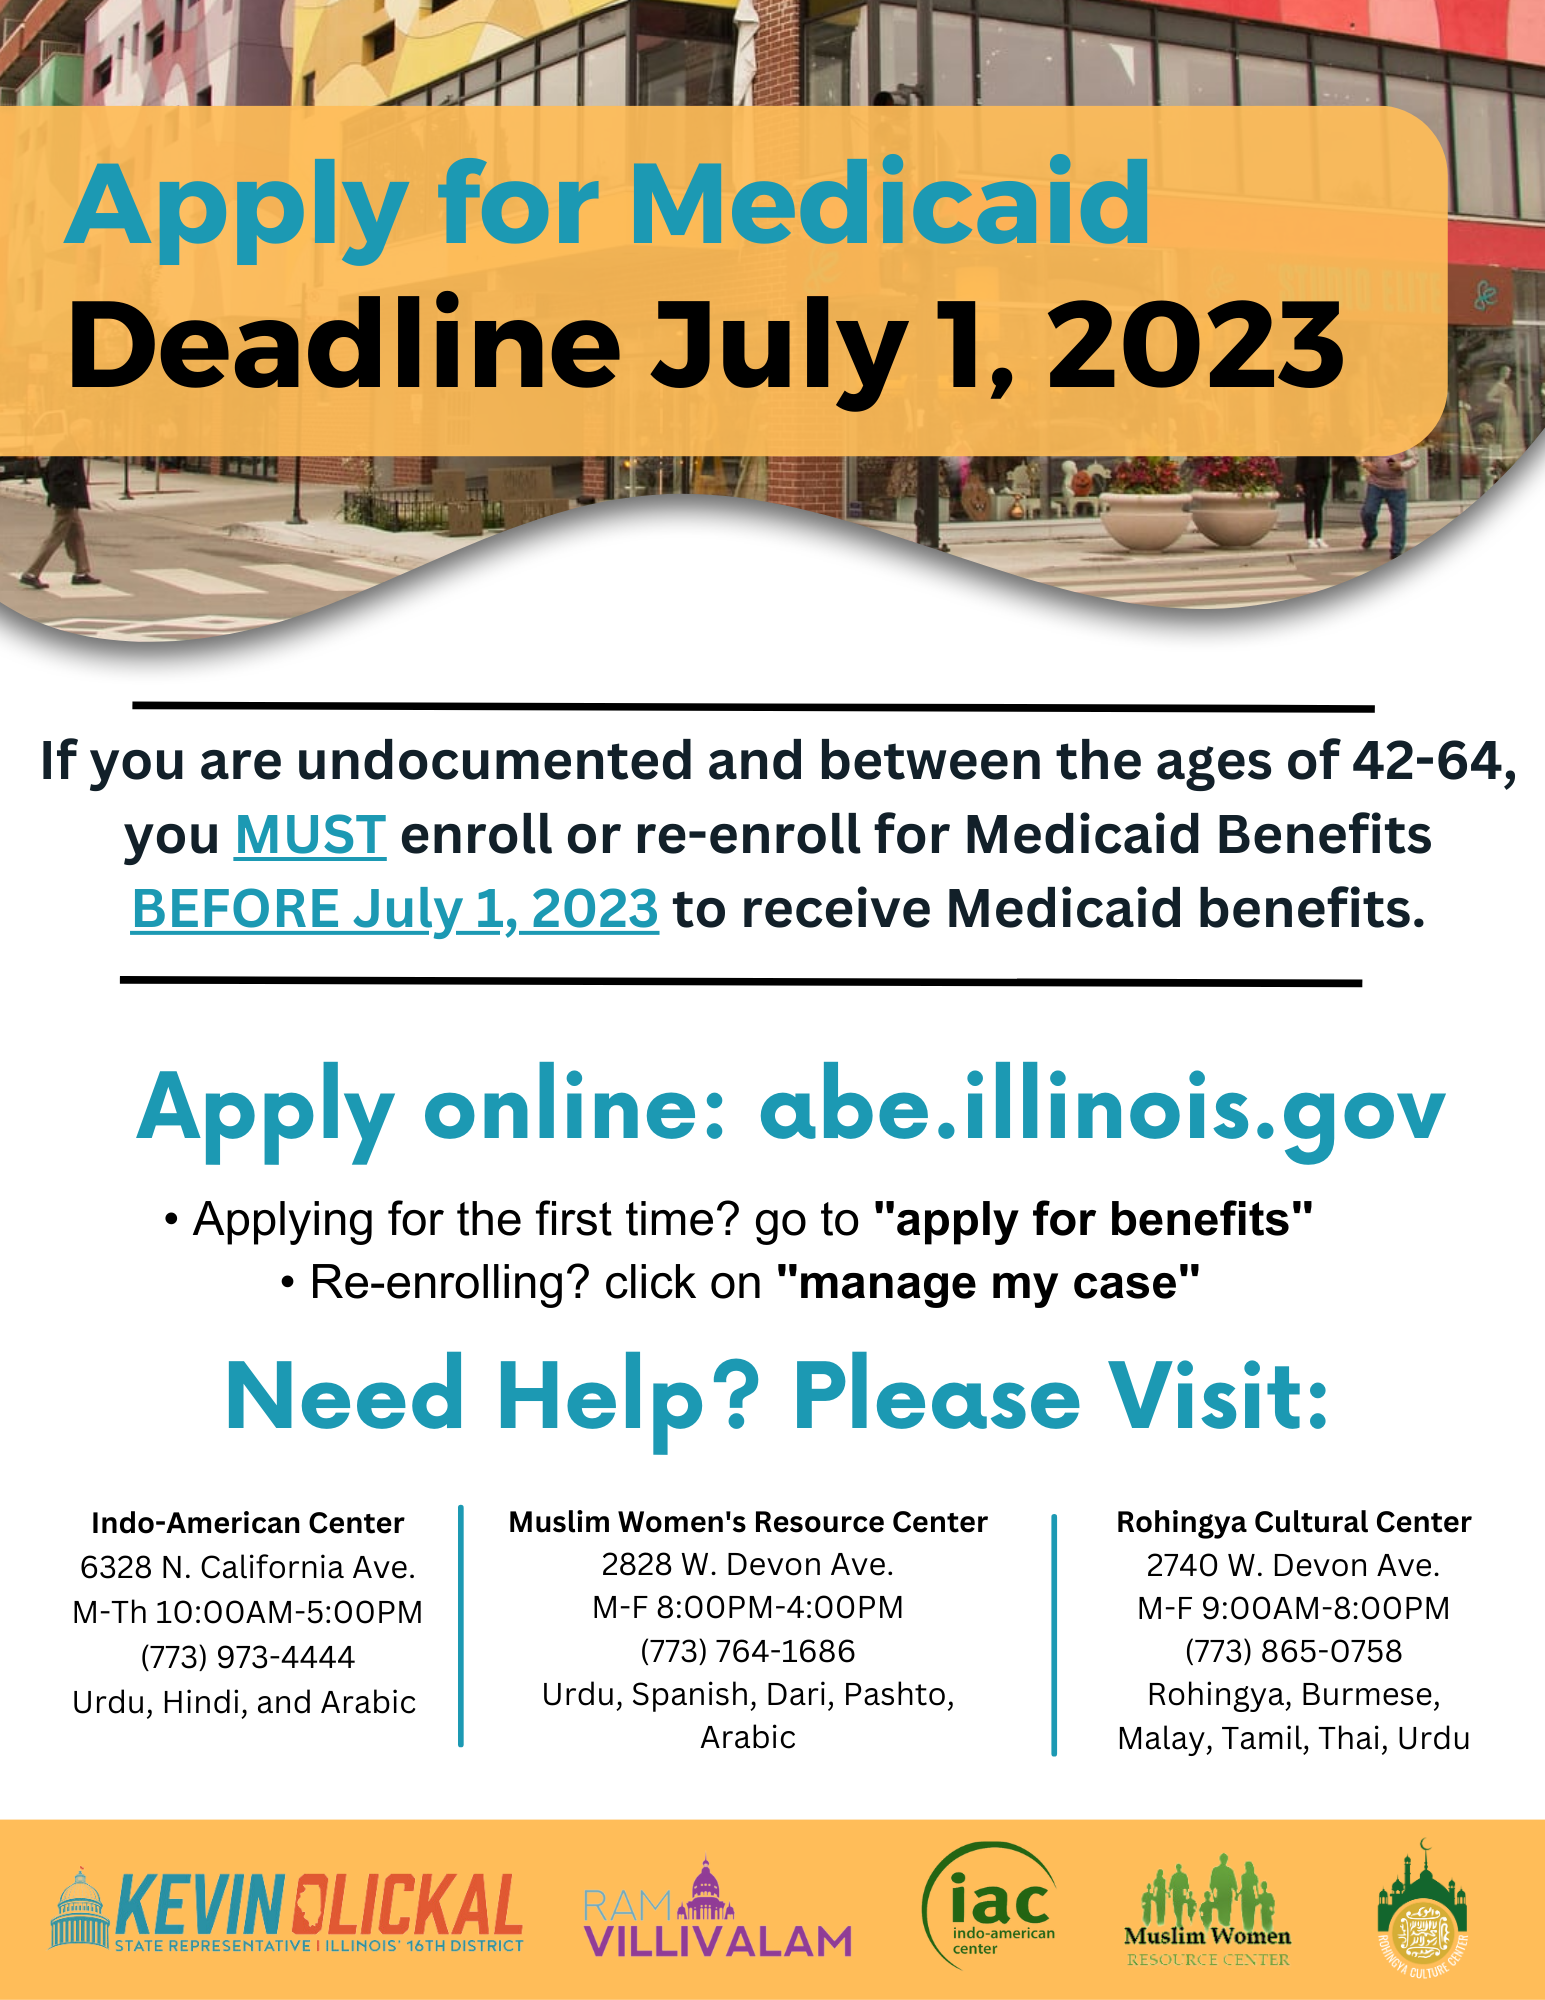 Deadline to Apply for Medicaid